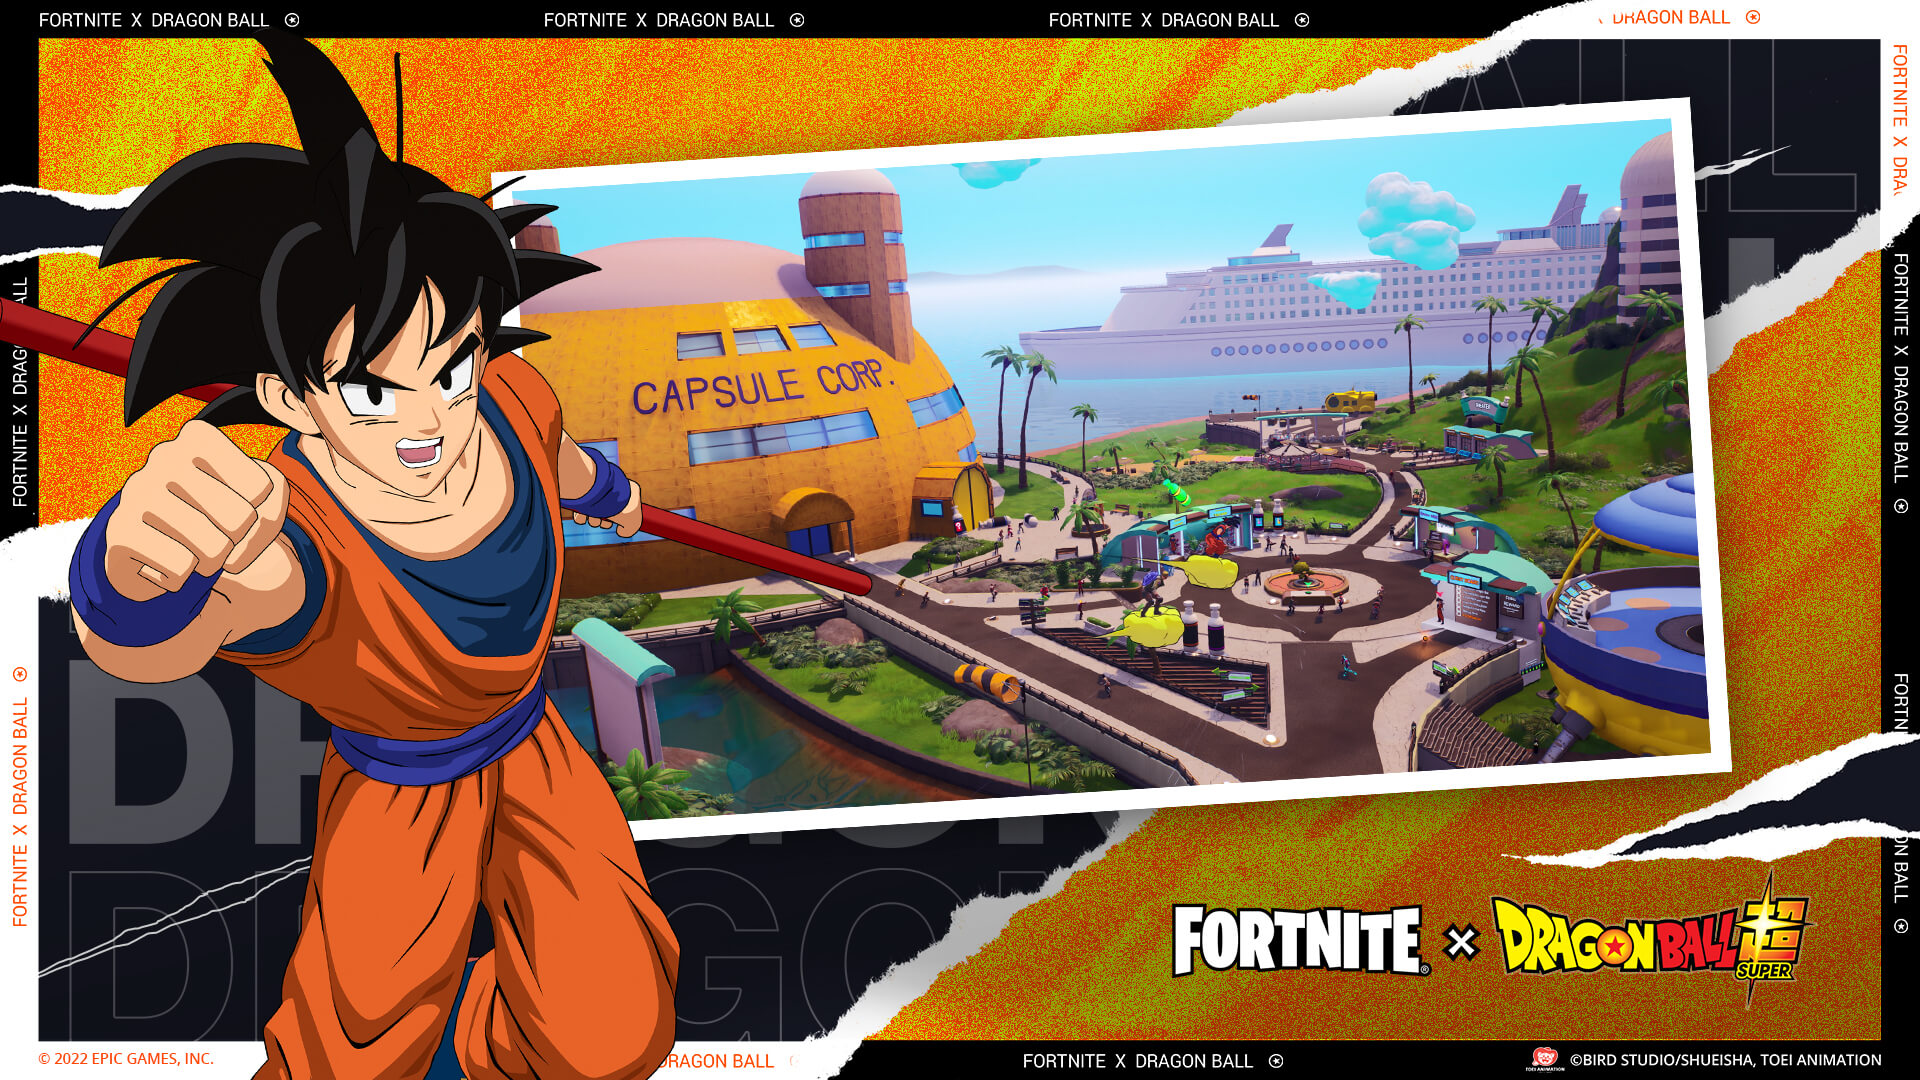 Unleash power with Goku in Fortnite x Dragon Ball crossover event